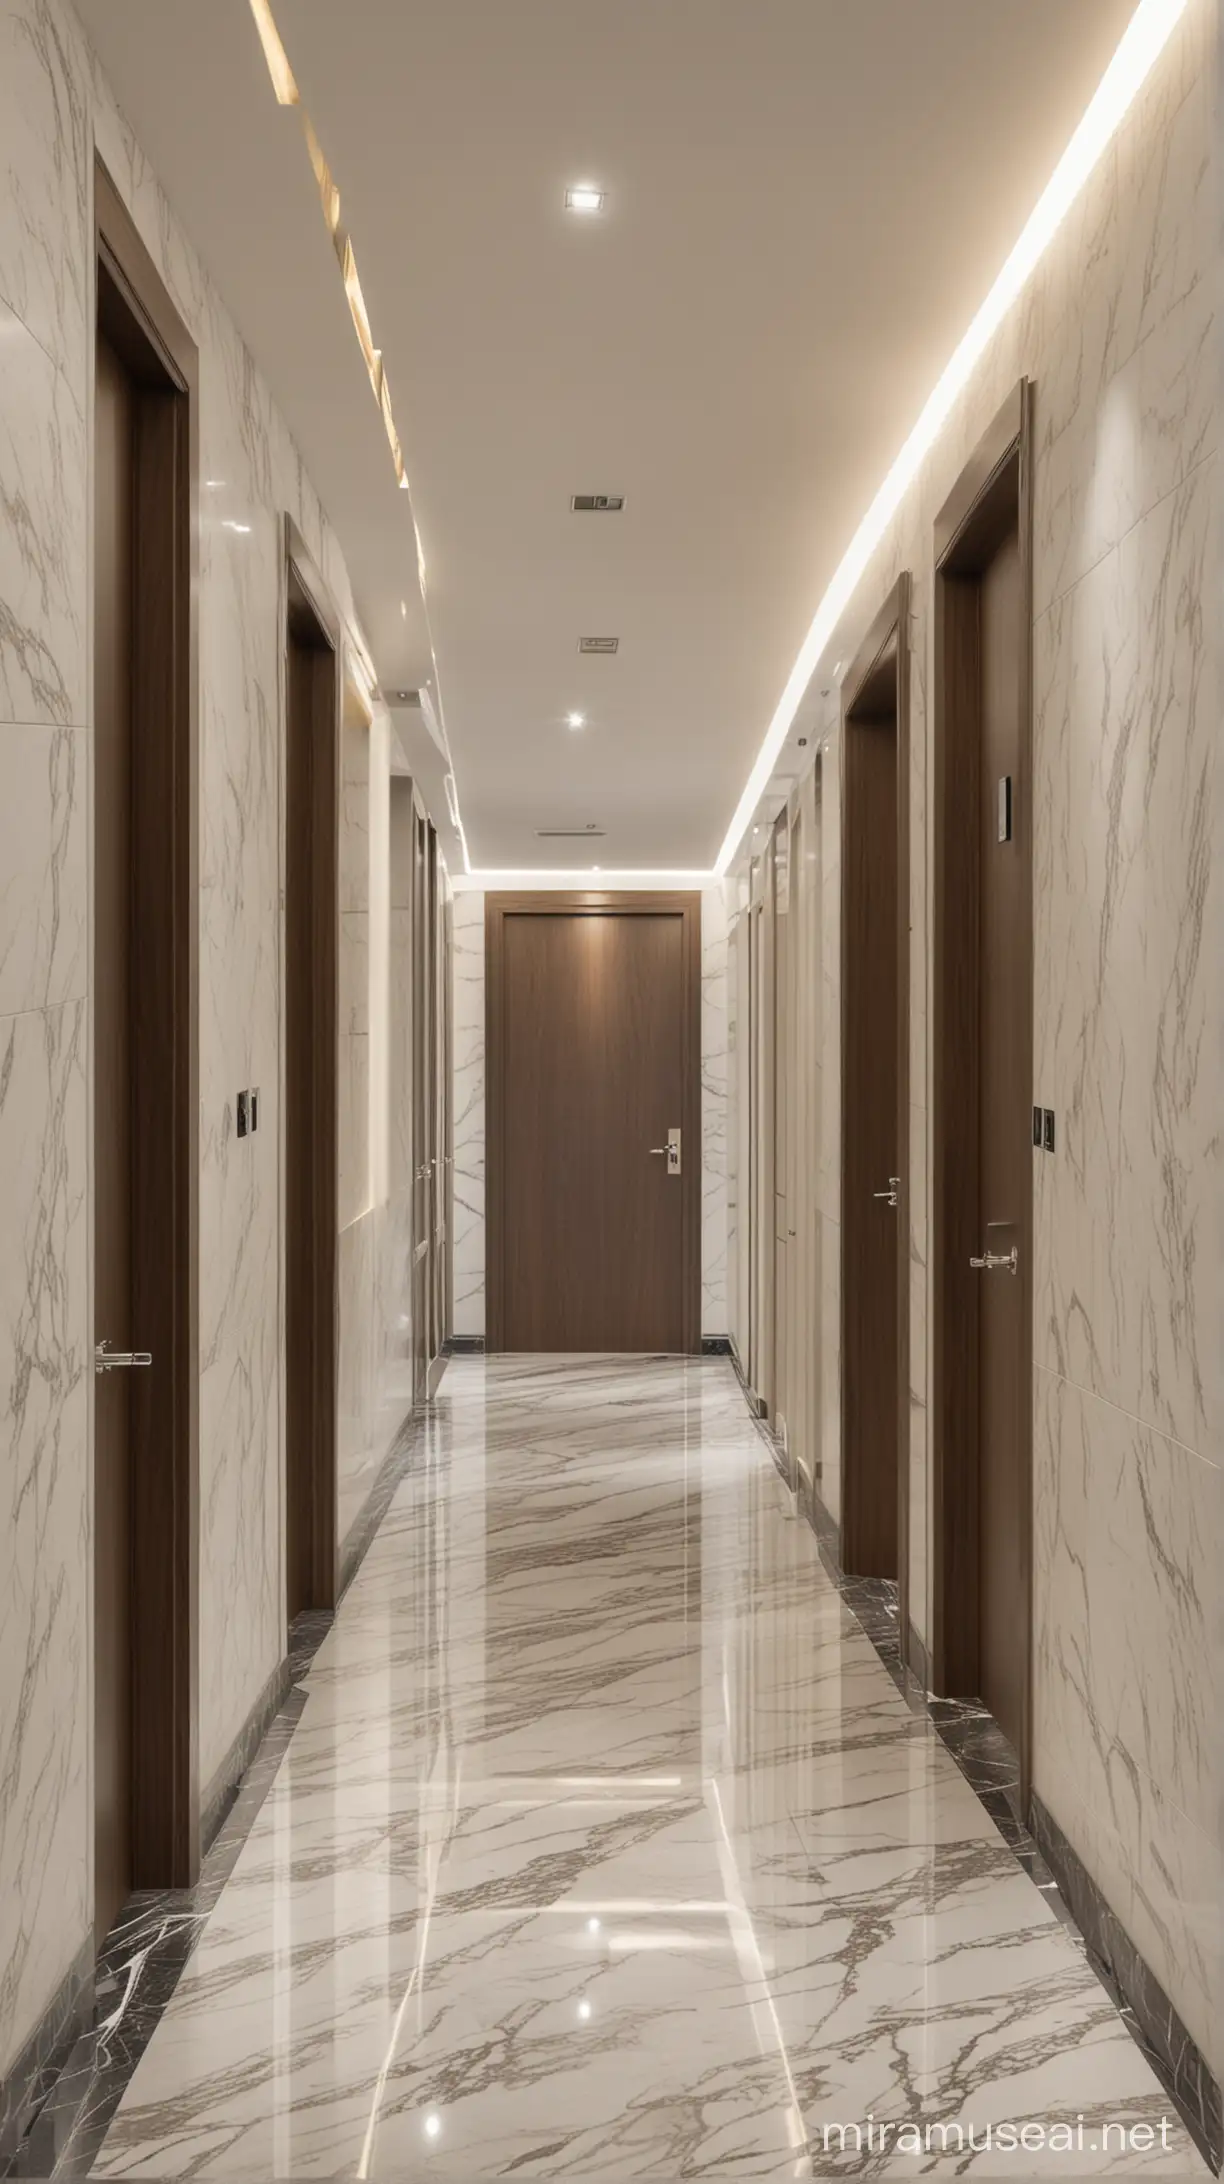 Modern Corridor with Decorative Panels and Marble Flooring